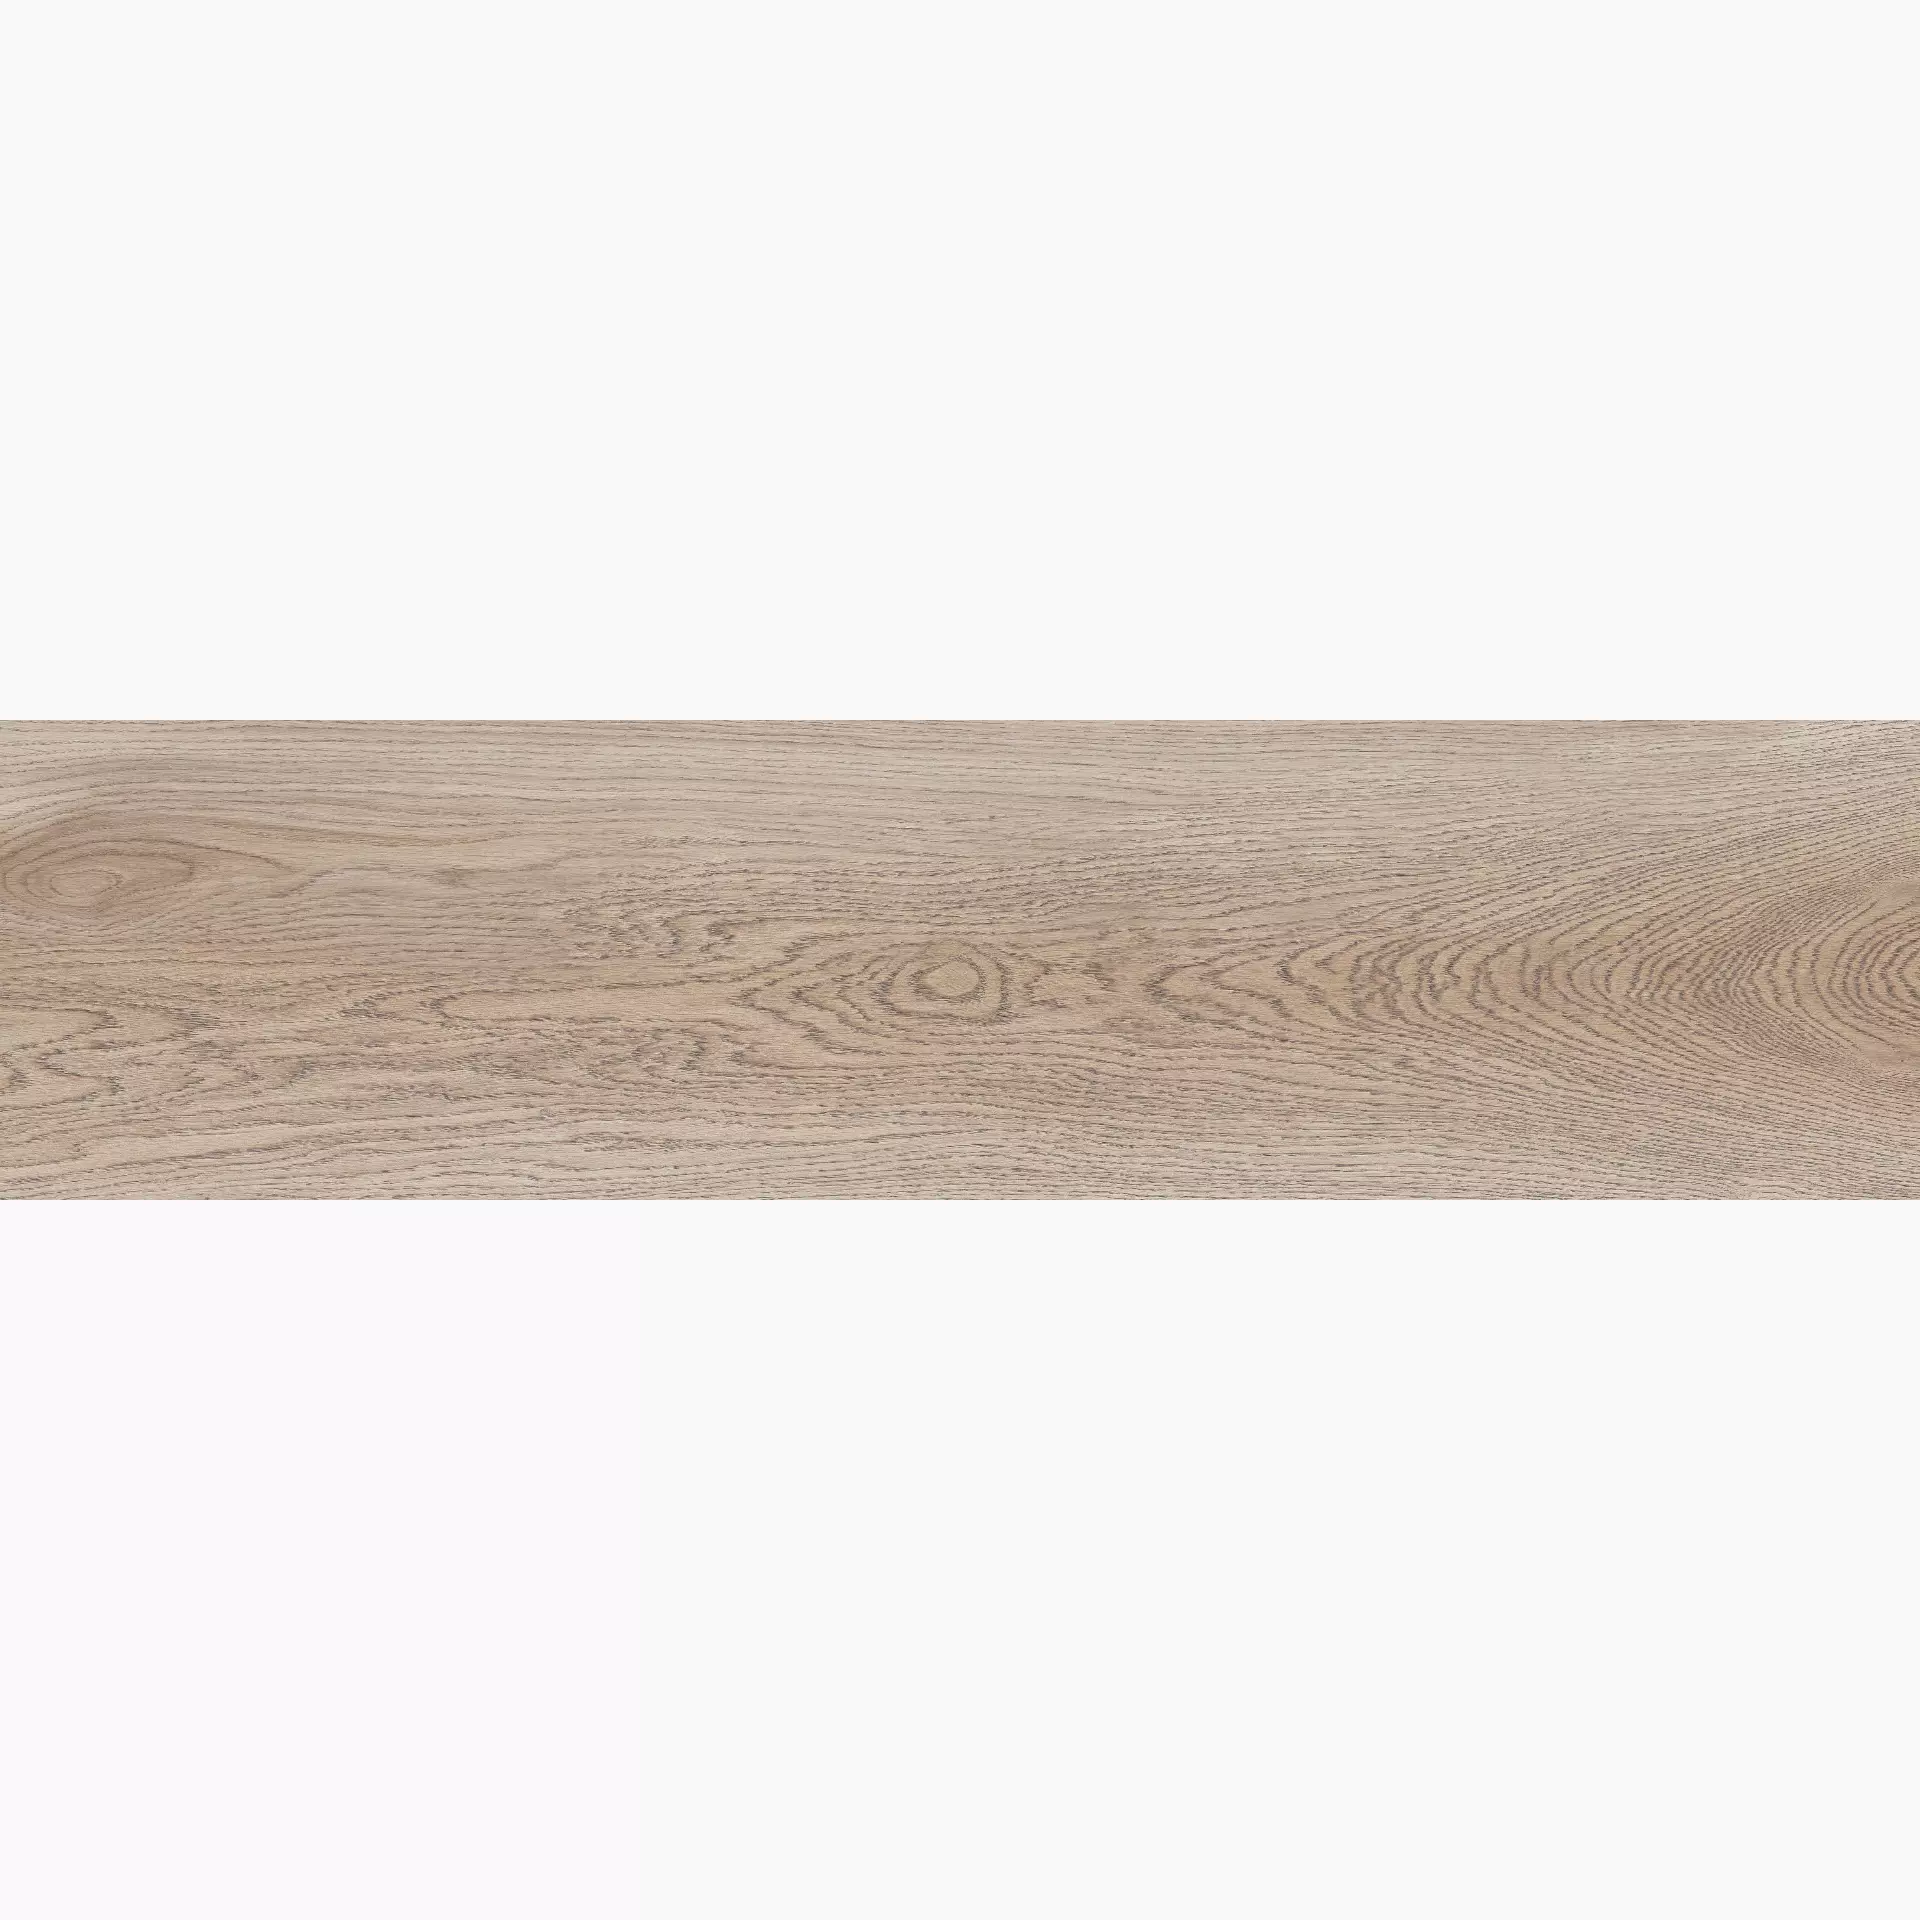 Flaviker Four Seasons Biscuit Naturale PF60011808 30x120cm rectified 8,5mm